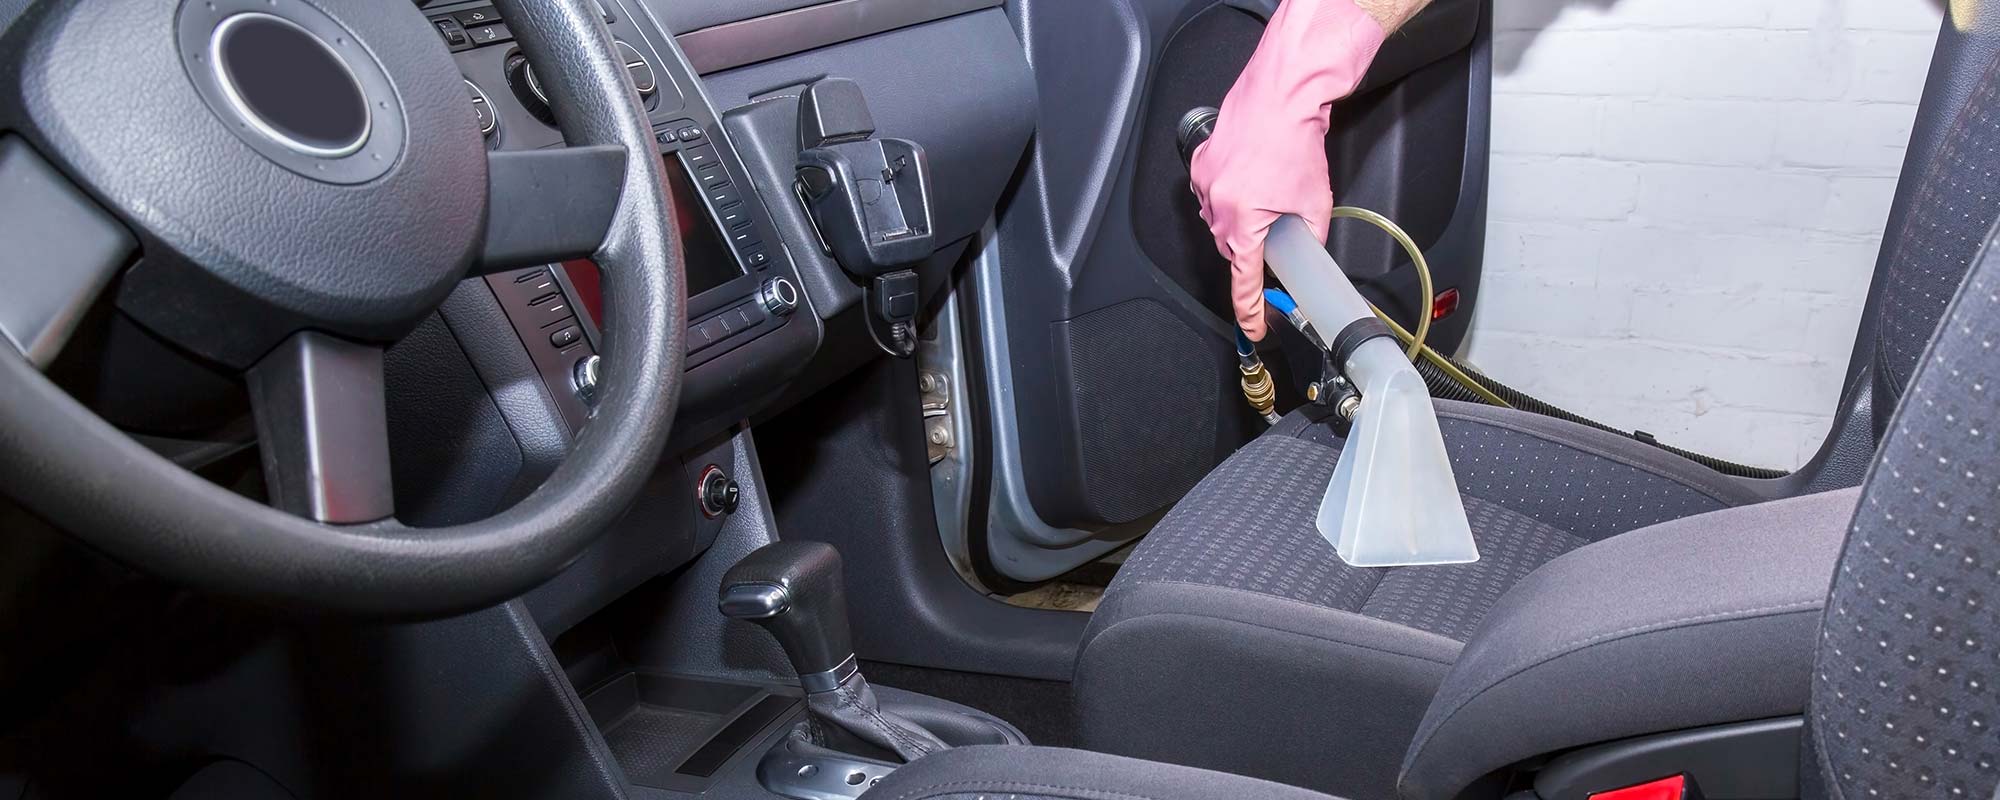 Automobile upholstery being cleaned by vacuum